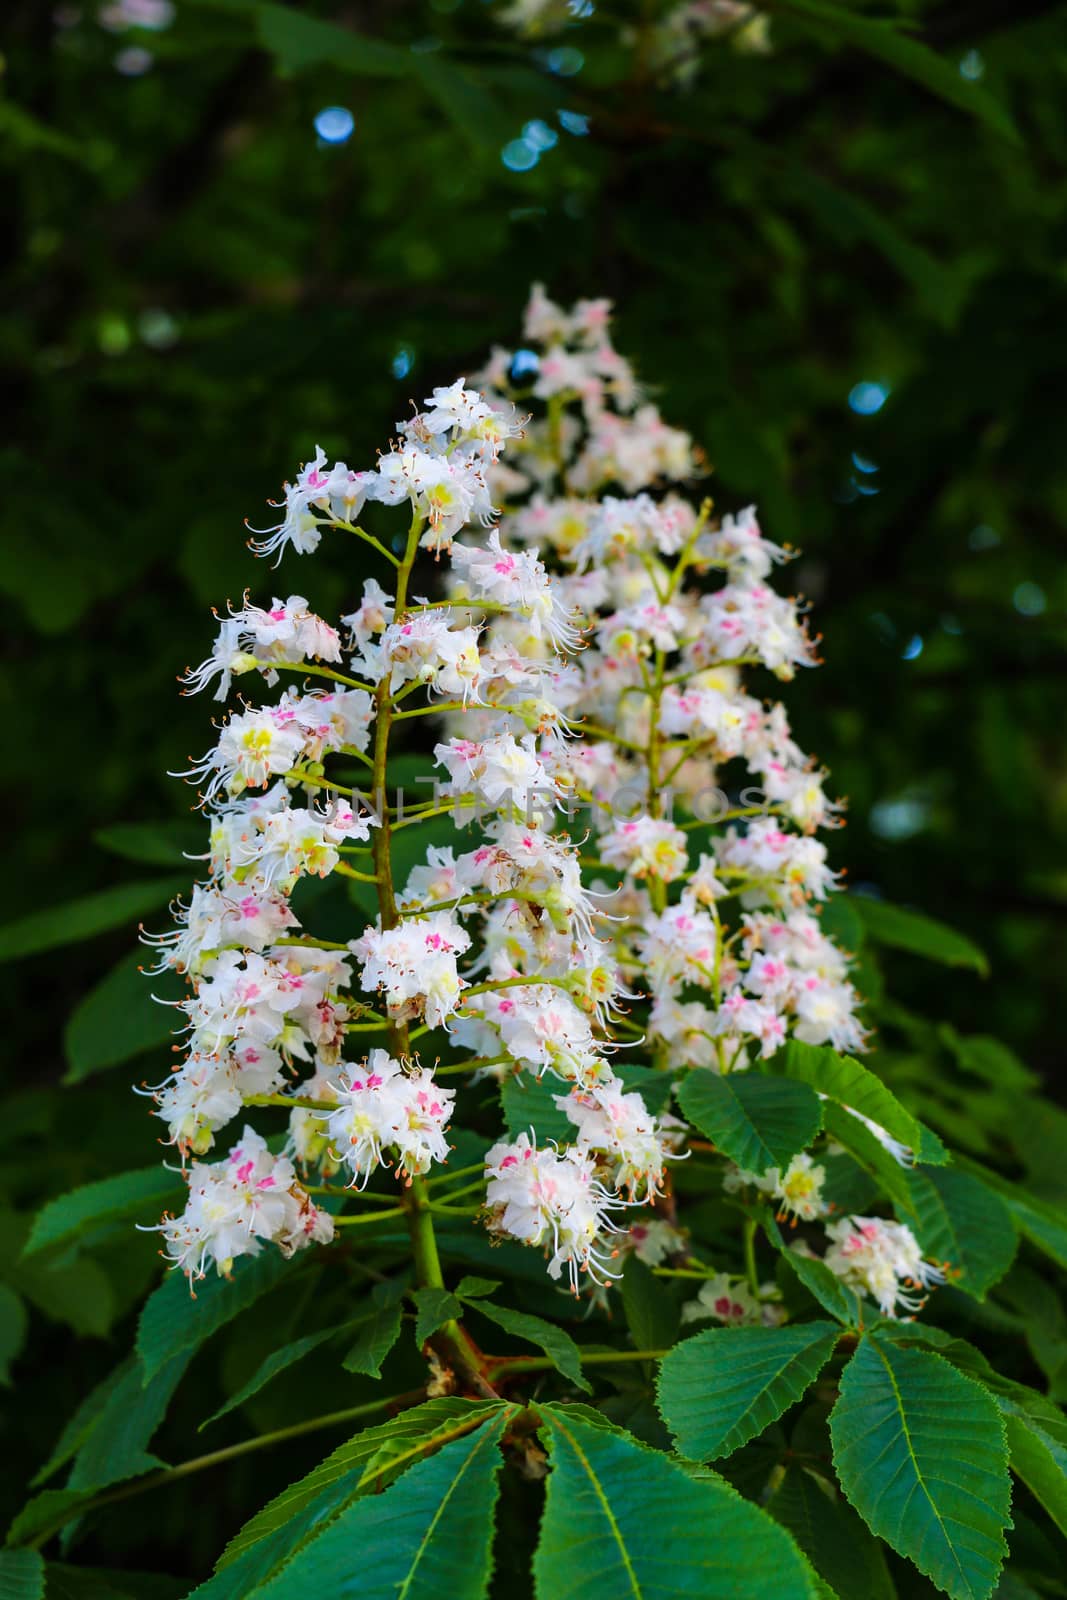 Macro photo of blooming chestnut flowers. Horse-chestnut or aesculus hippocastanum blossom. Close-up